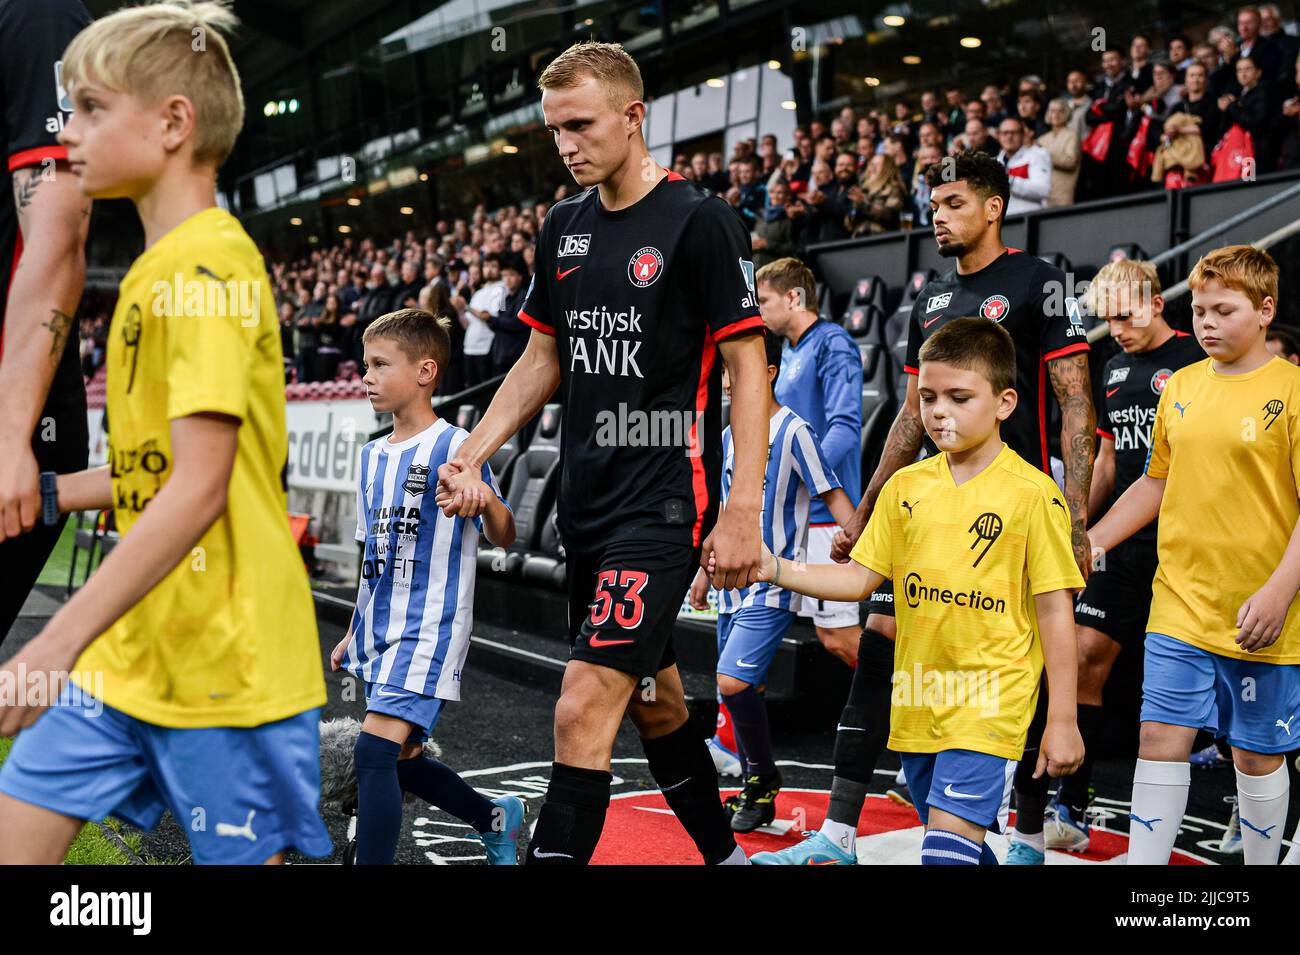 Herning, Denmark. 22nd, July 2022. Victor Lind (53) of FC Midtjylland seen during the 3F Superliga match between FC Midtjylland and Silkeborg IF at MCH Arena in Herning. (Photo credit: Gonzales Photo - Morten Kjaer). Stock Photo